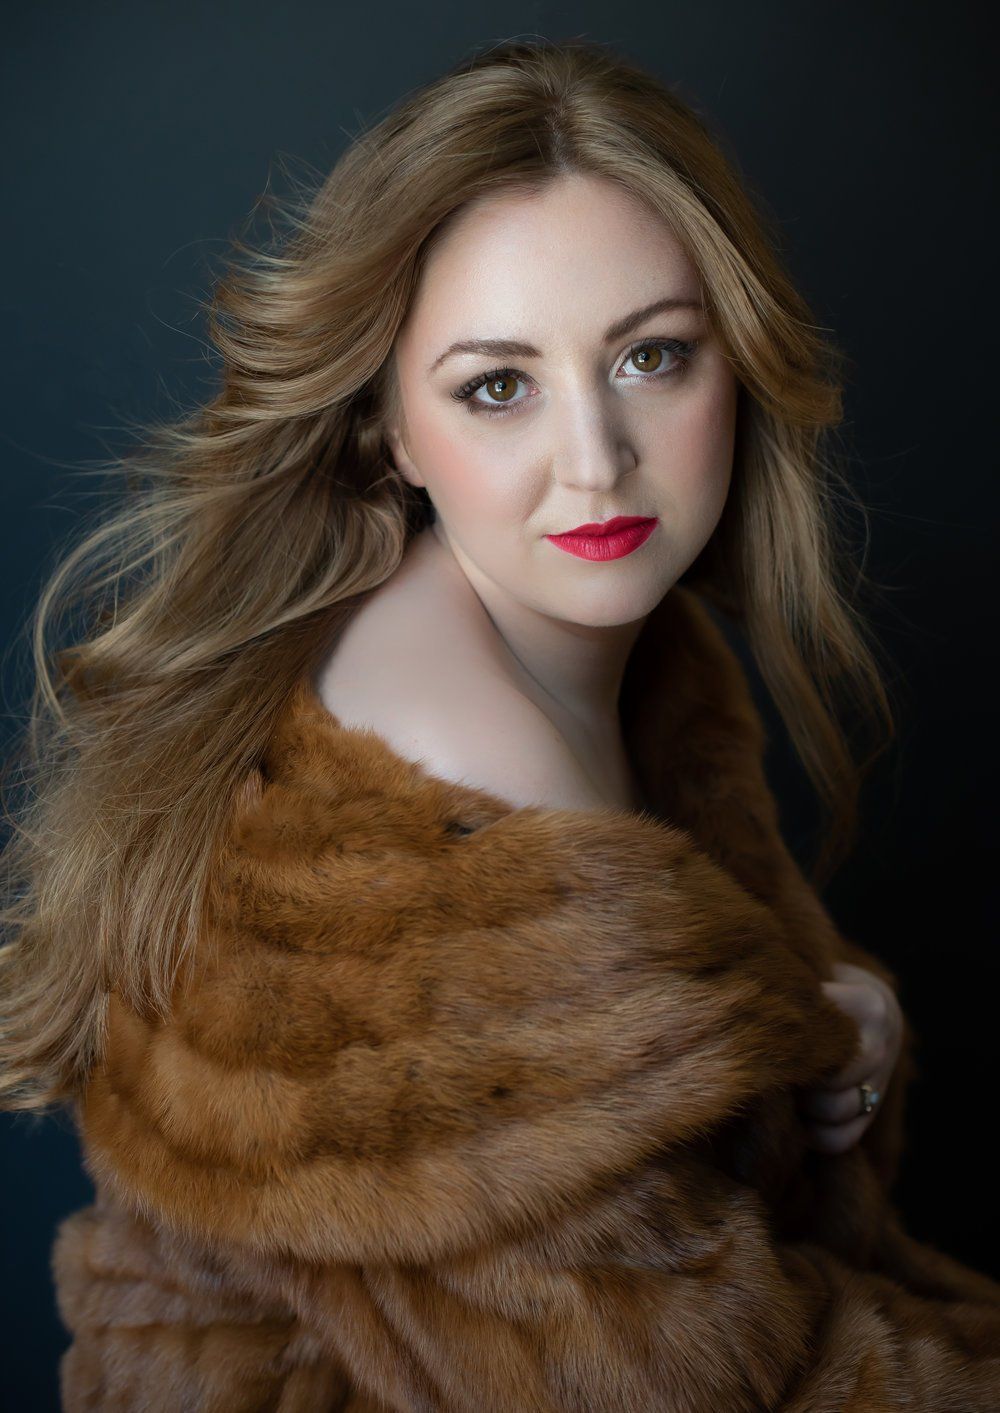 Professional Portrait Photography | Stacey Naglie Toronto  | Woman in fur coat with shoulder exposed